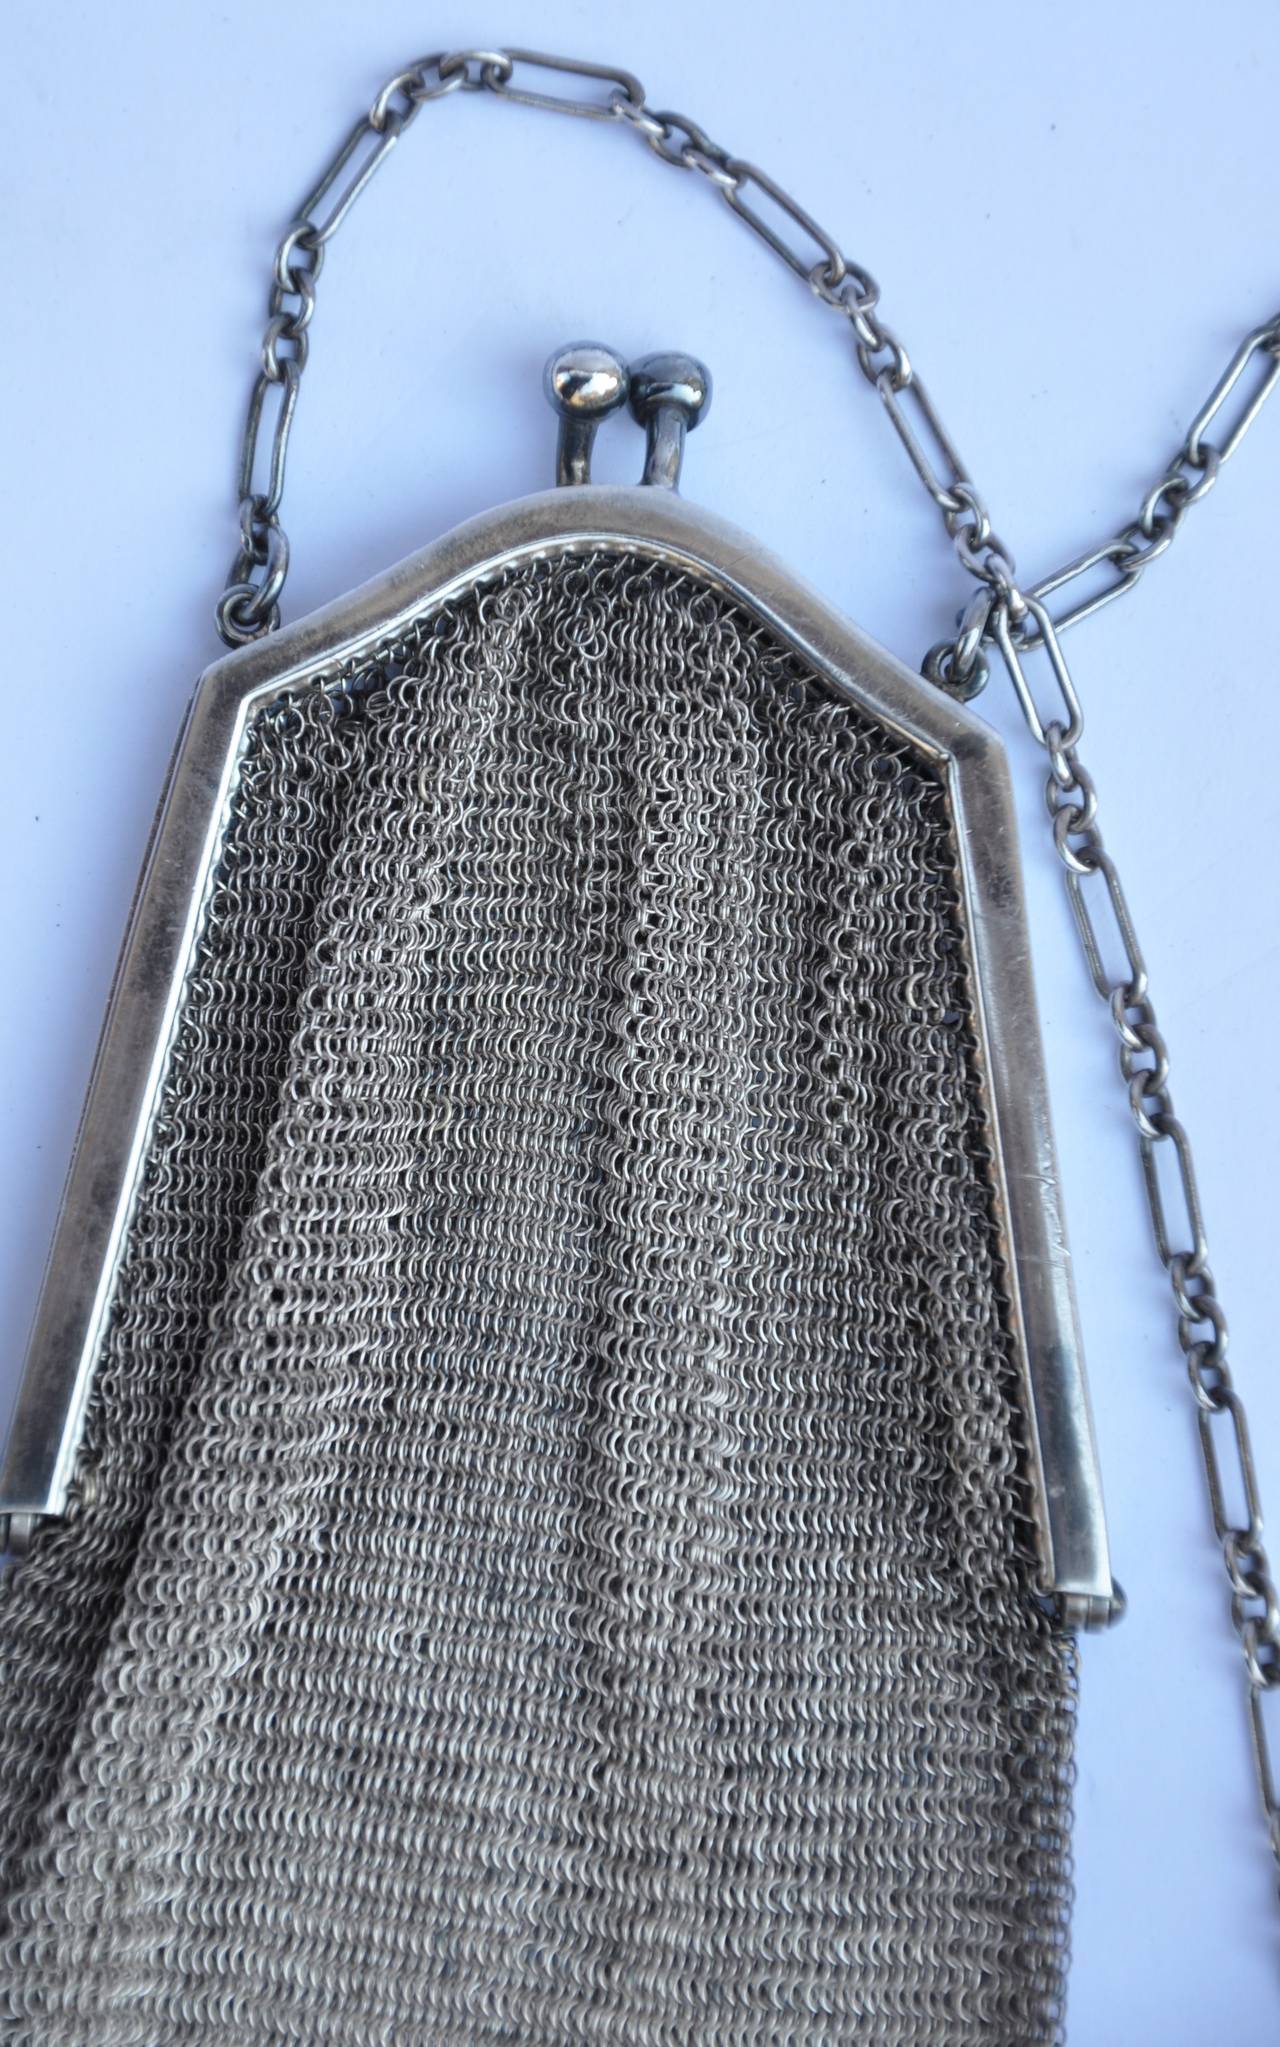 Wonderfully detailed, this sterling silver mesh weave evening handbag is accented with a sterling silver fringe. The fringe measures from 1